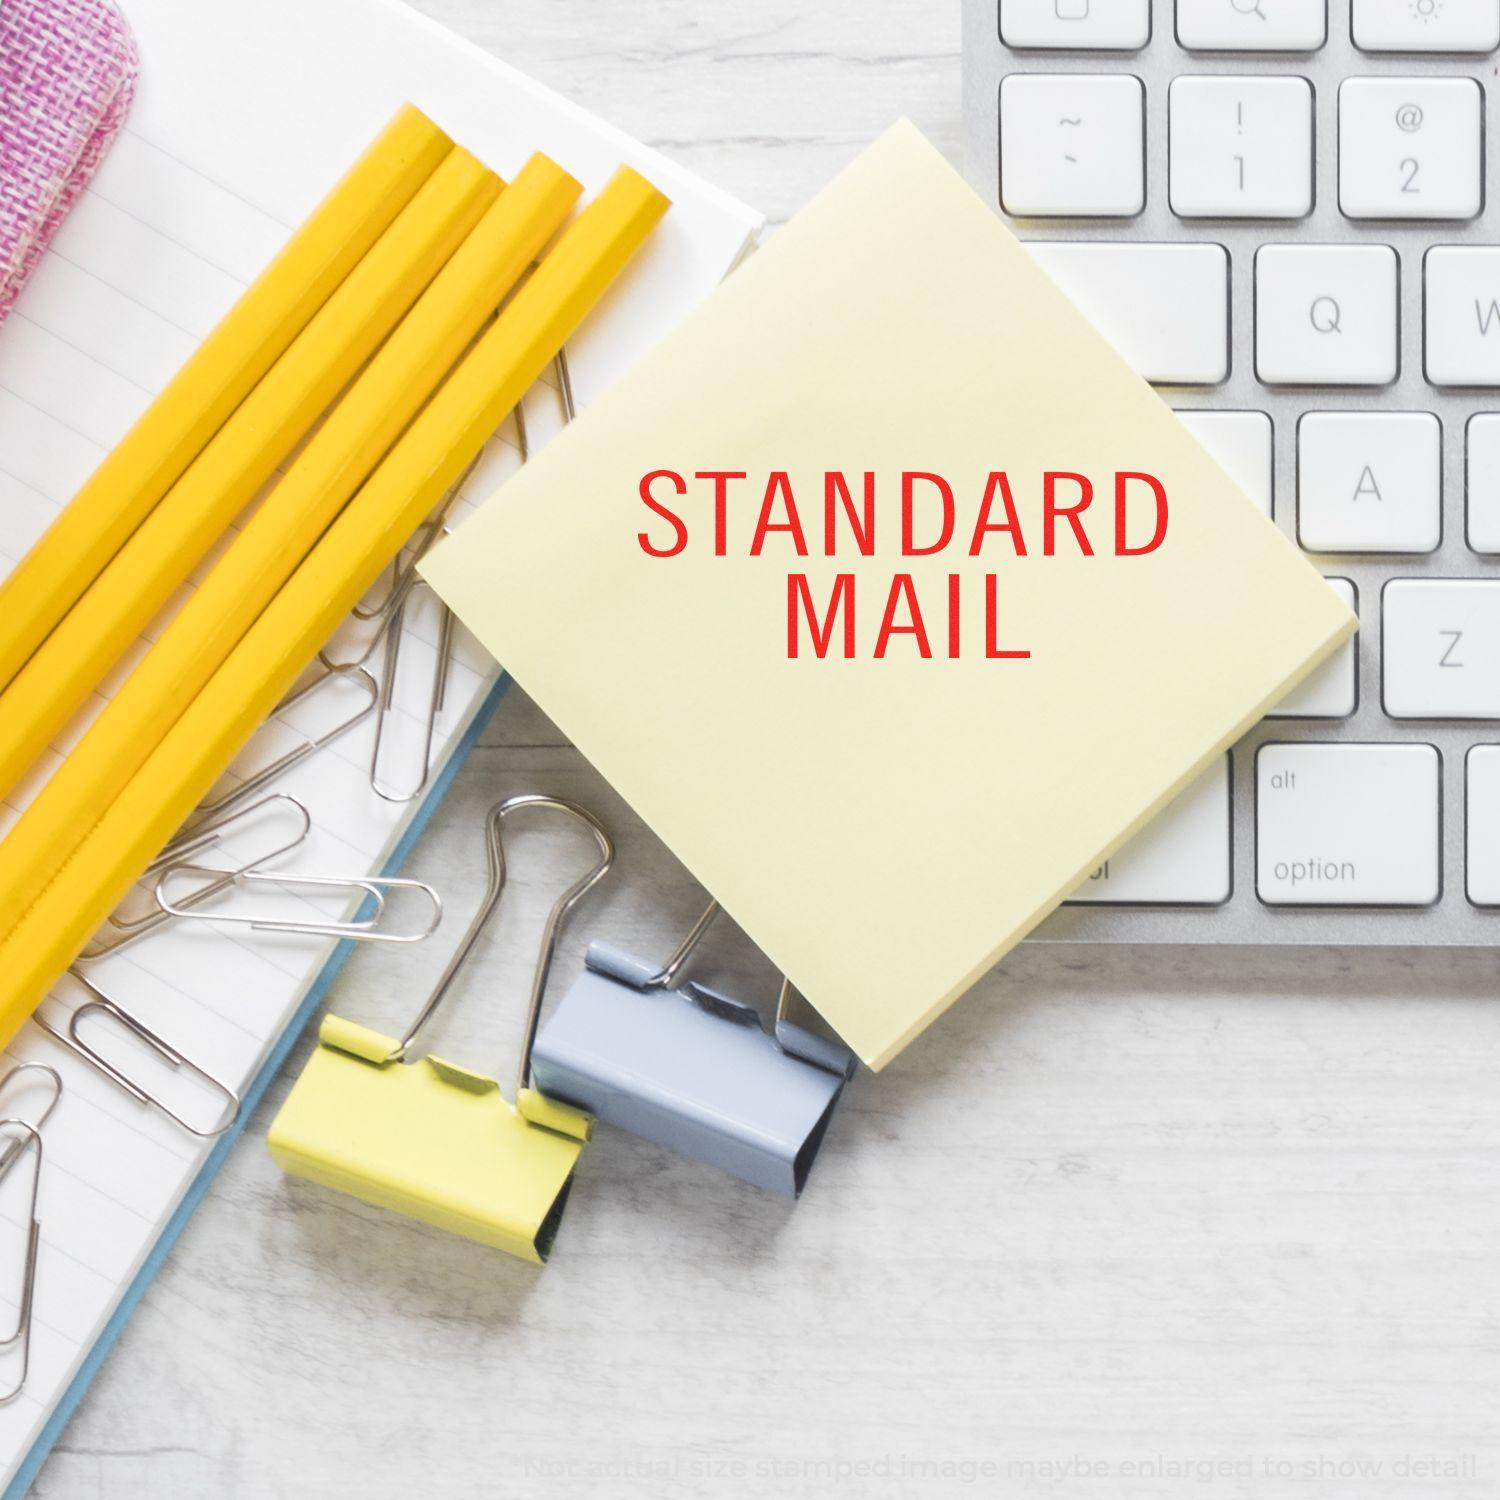 A self-inking stamp with a stamped image showing how the text "STANDARD MAIL" in a large stacked font is displayed by it after stamping.